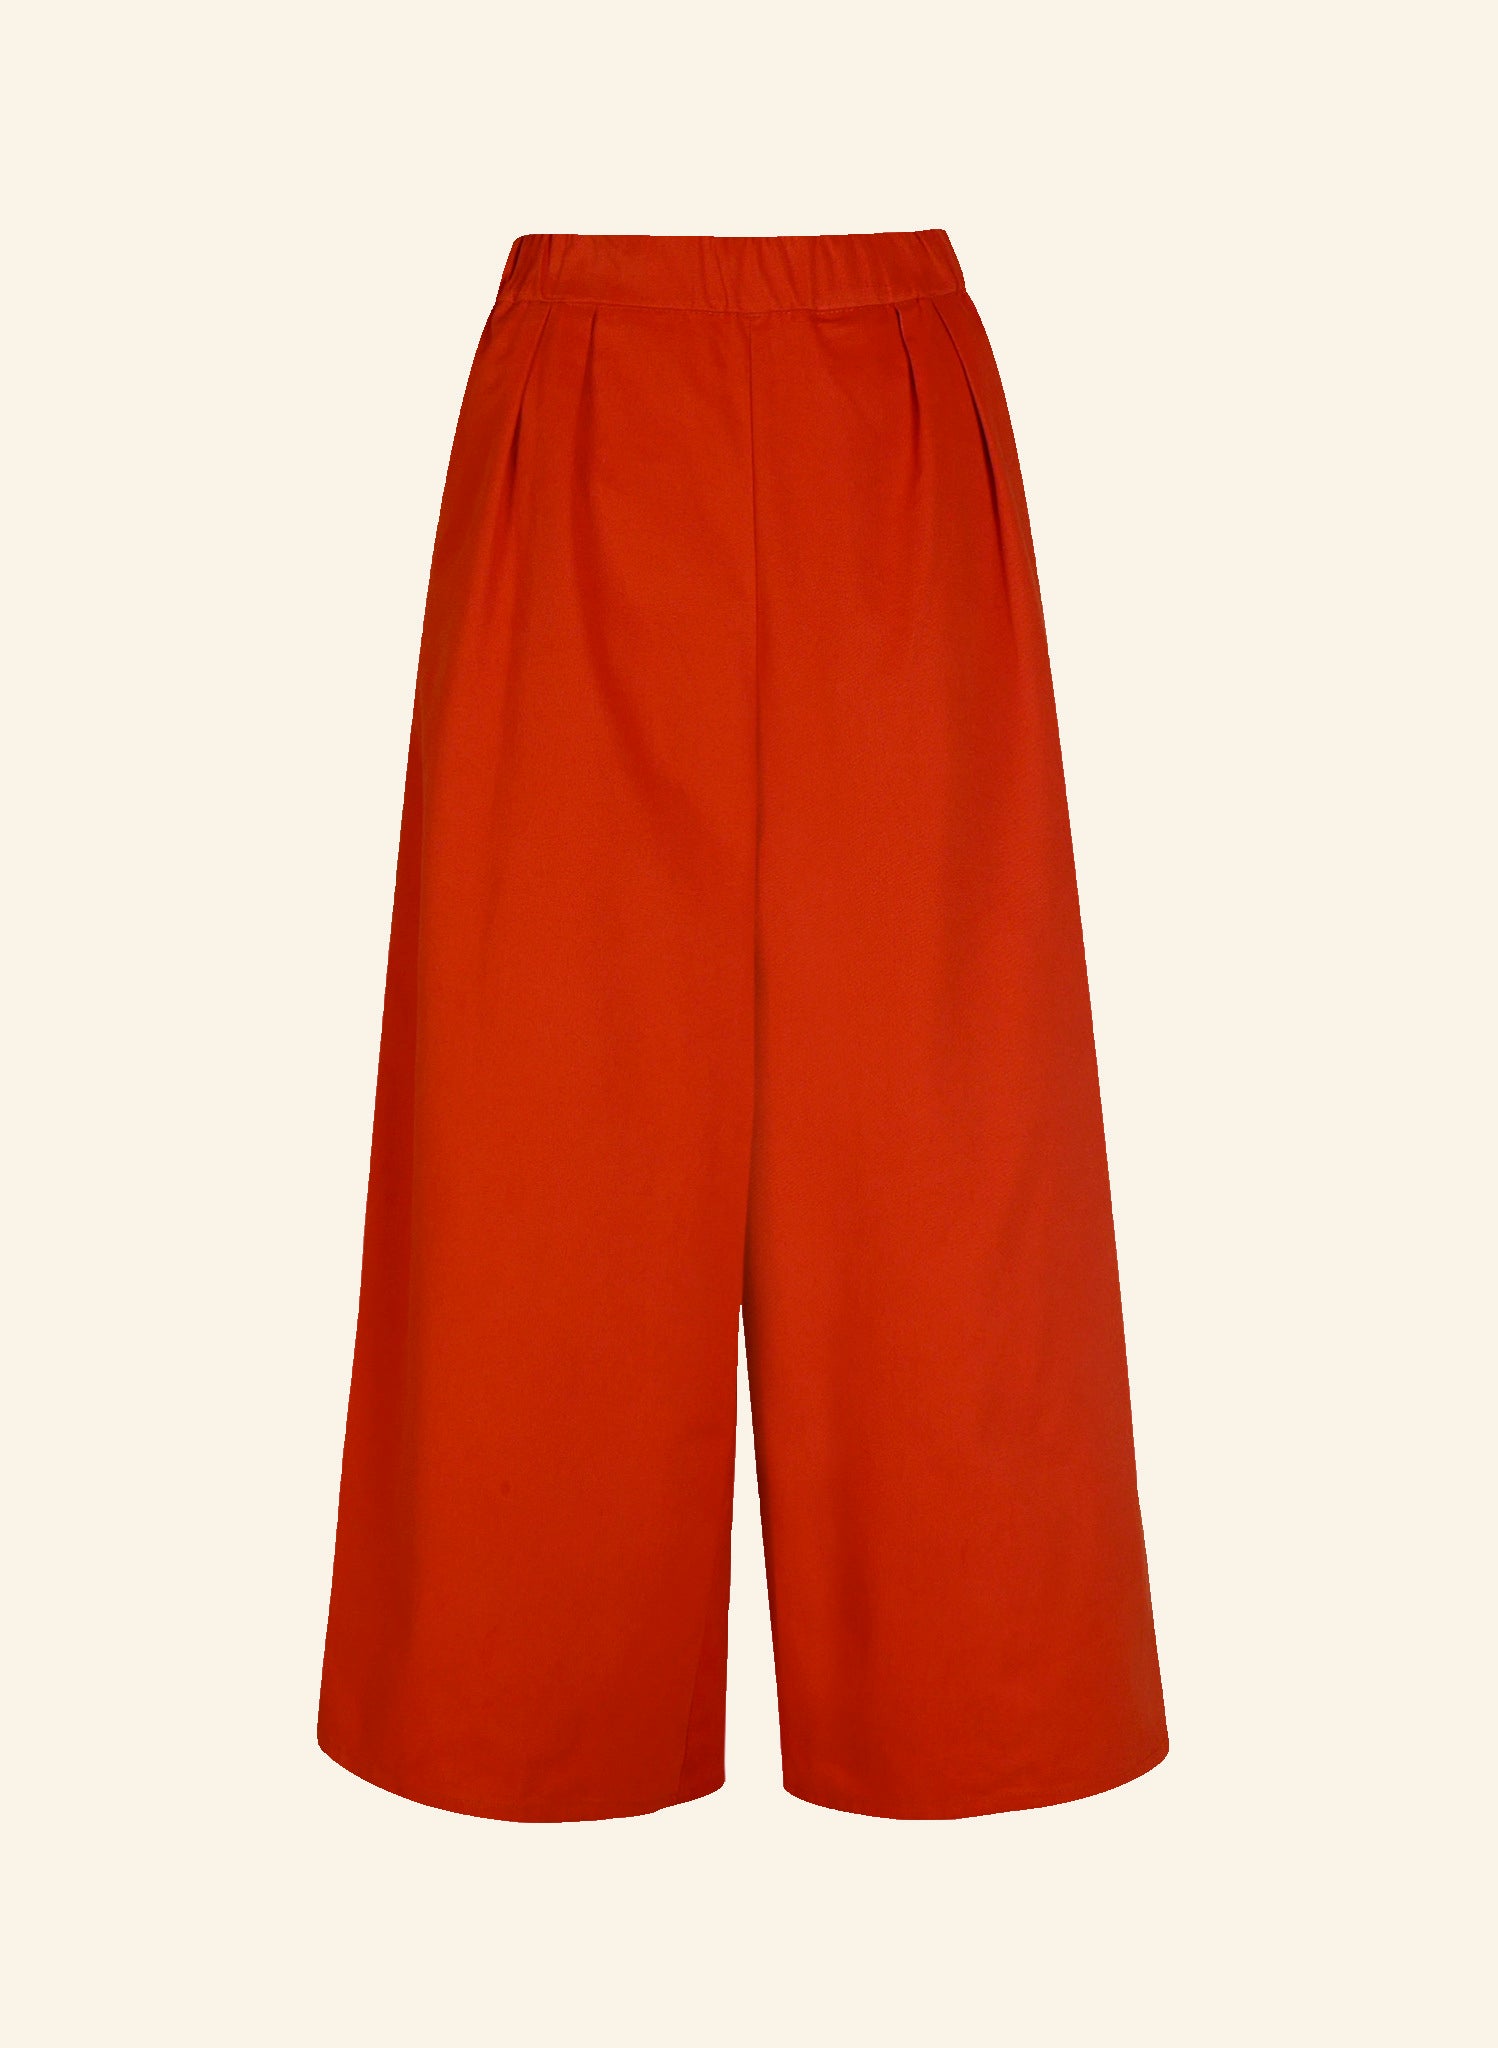 Edith - Red Workwear Trousers